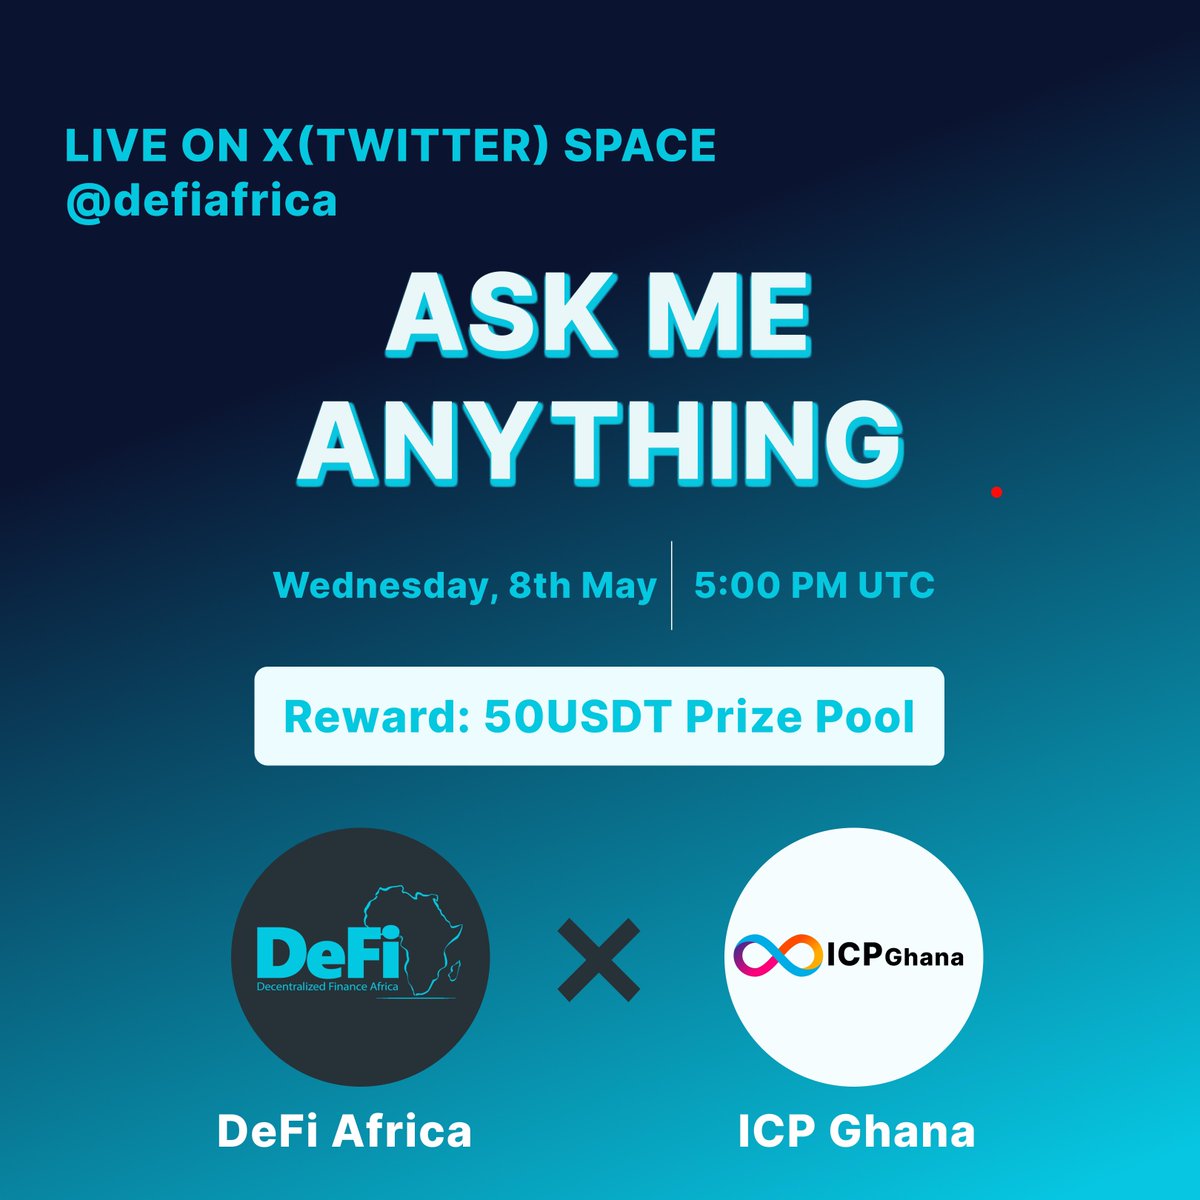 🎉 Excited to announce our upcoming #TwitterSpace #AMA with @icp_Ghana on May 8th at 5:00 PM UTC! 📍 Join us here: x.com/i/spaces/1ldxl… 💰 Don't miss out on the $50 USDT reward! 〽️ Rules: 1️⃣ Follow @defiafrica & @icp_Ghana